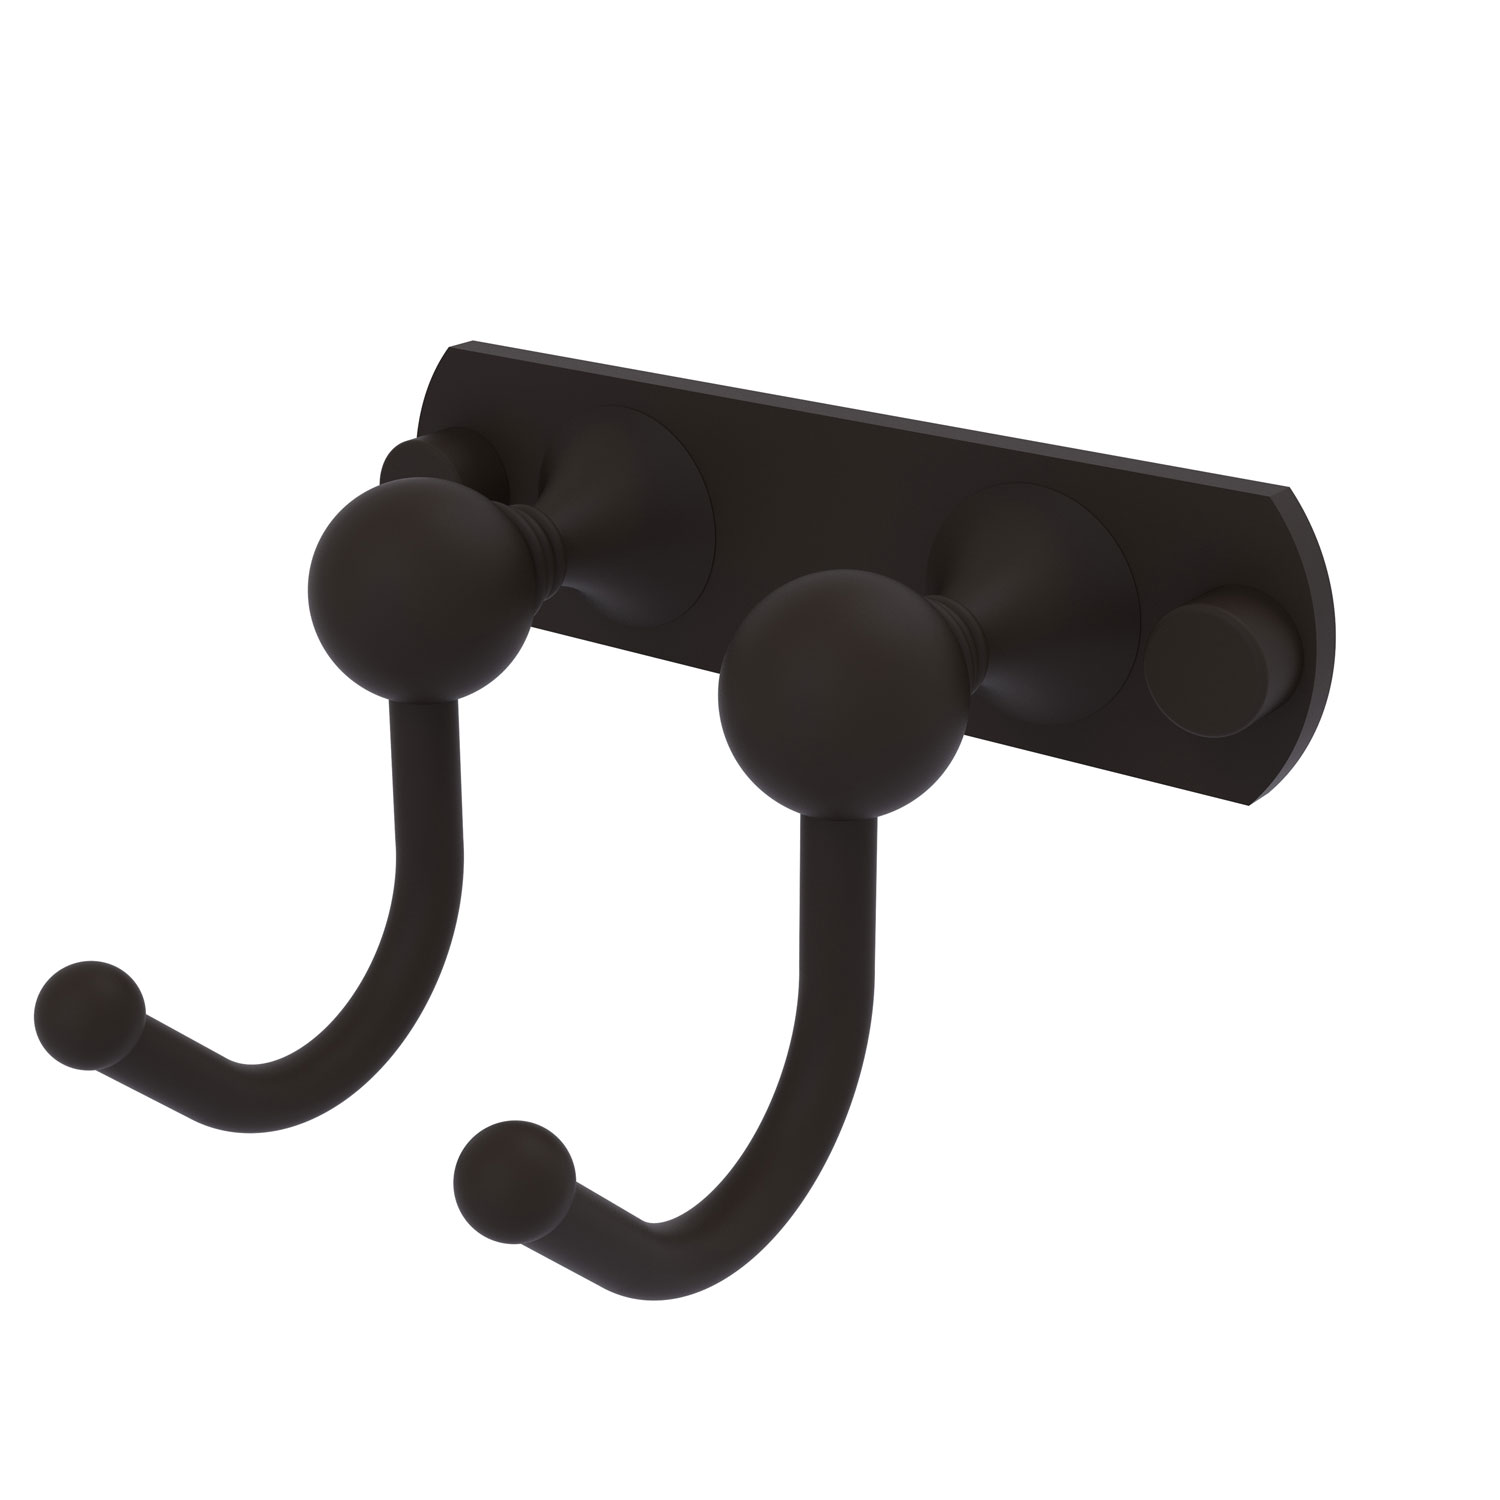 Shadwell Oil Rubbed Bronze Four-Inch Two-Position Multi Hook